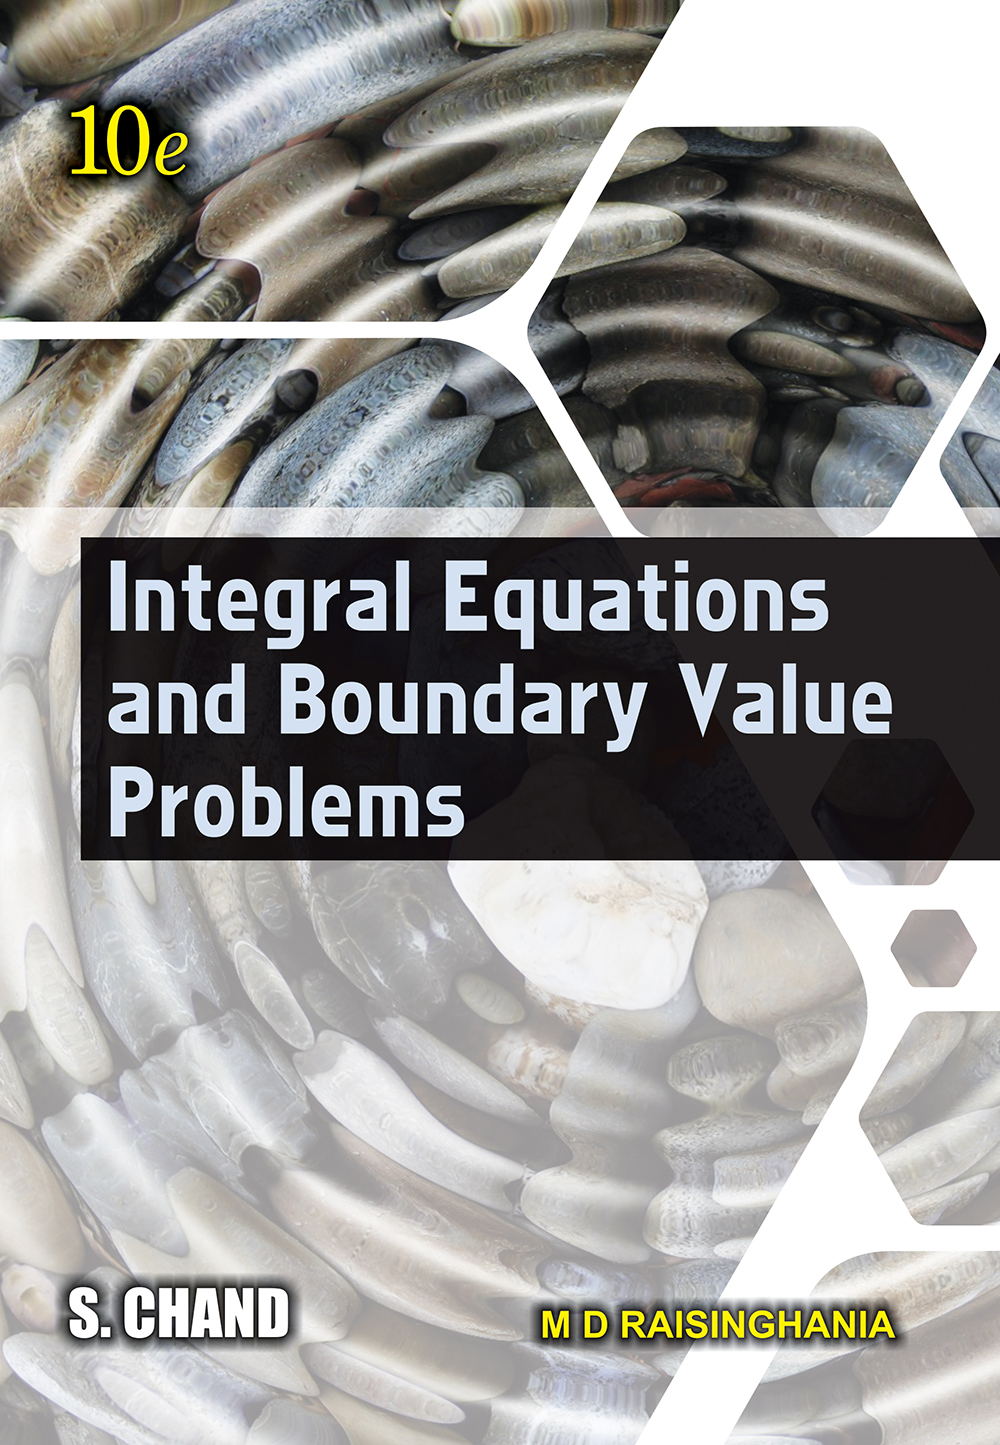 Integral Equations and Boundary Value Problems